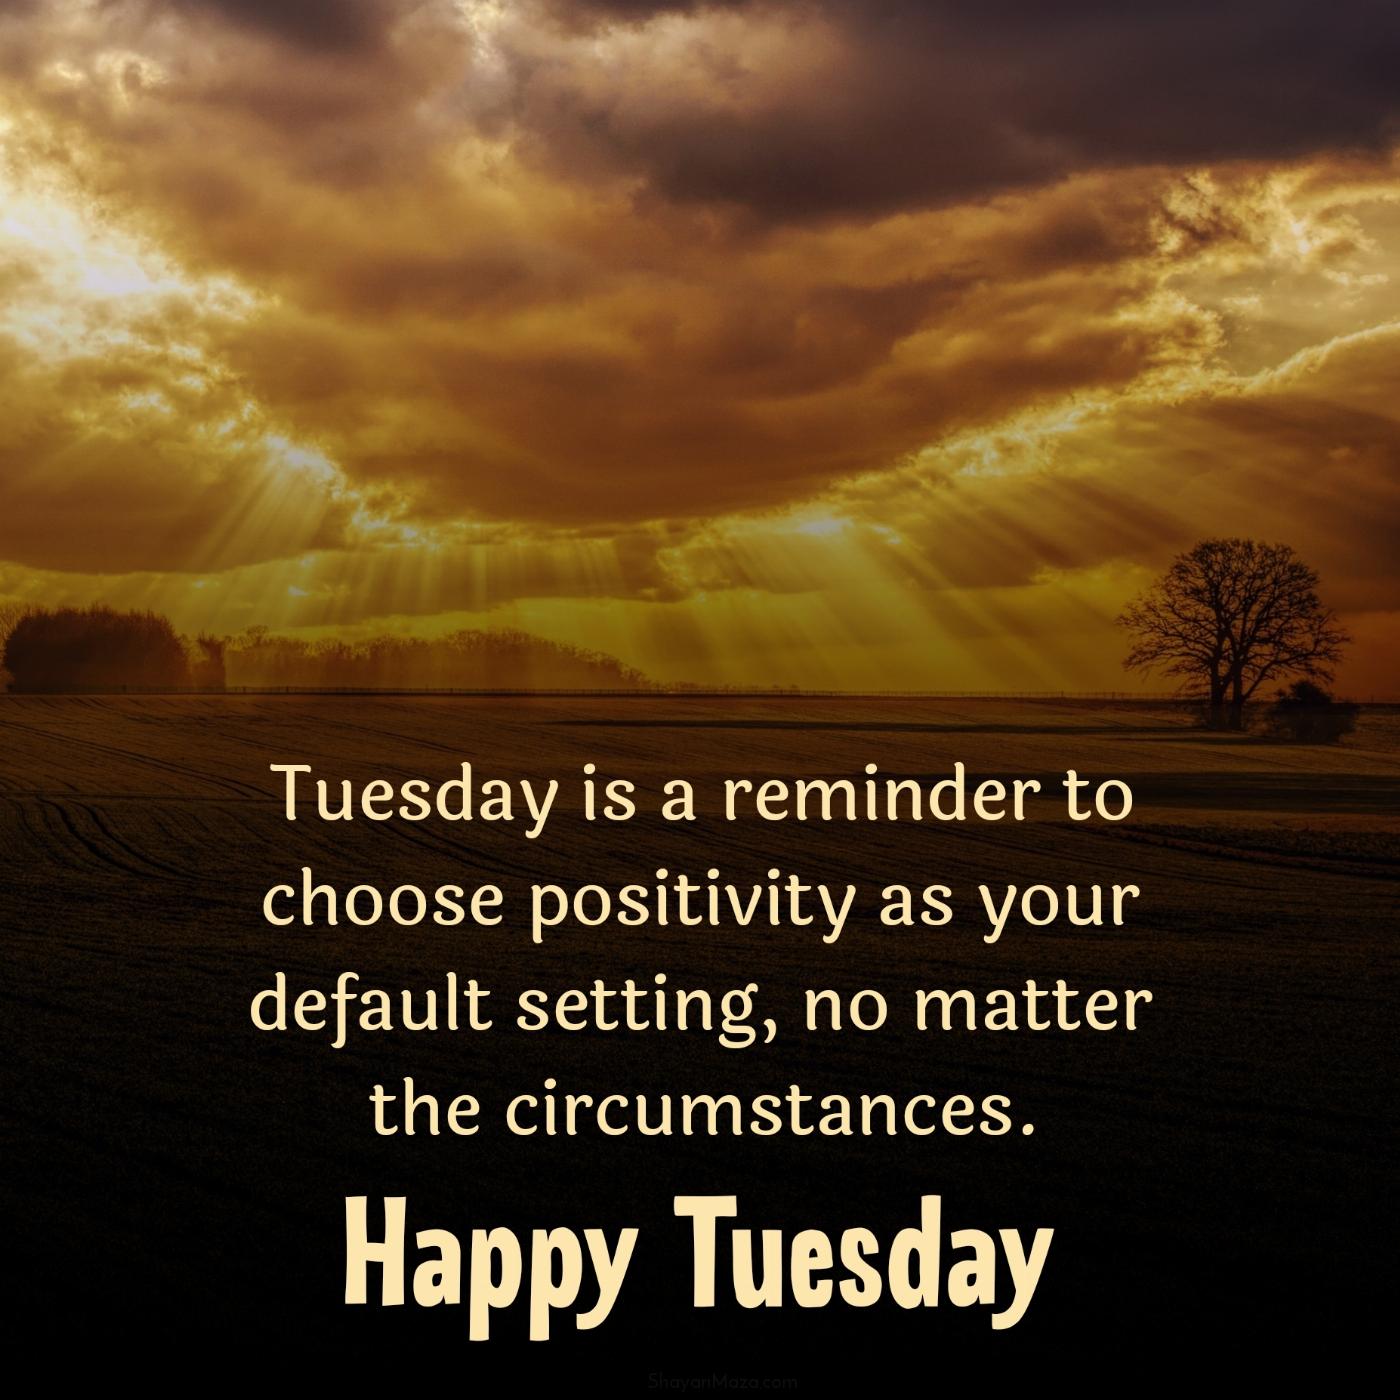 Tuesday is a reminder to choose positivity as your default setting